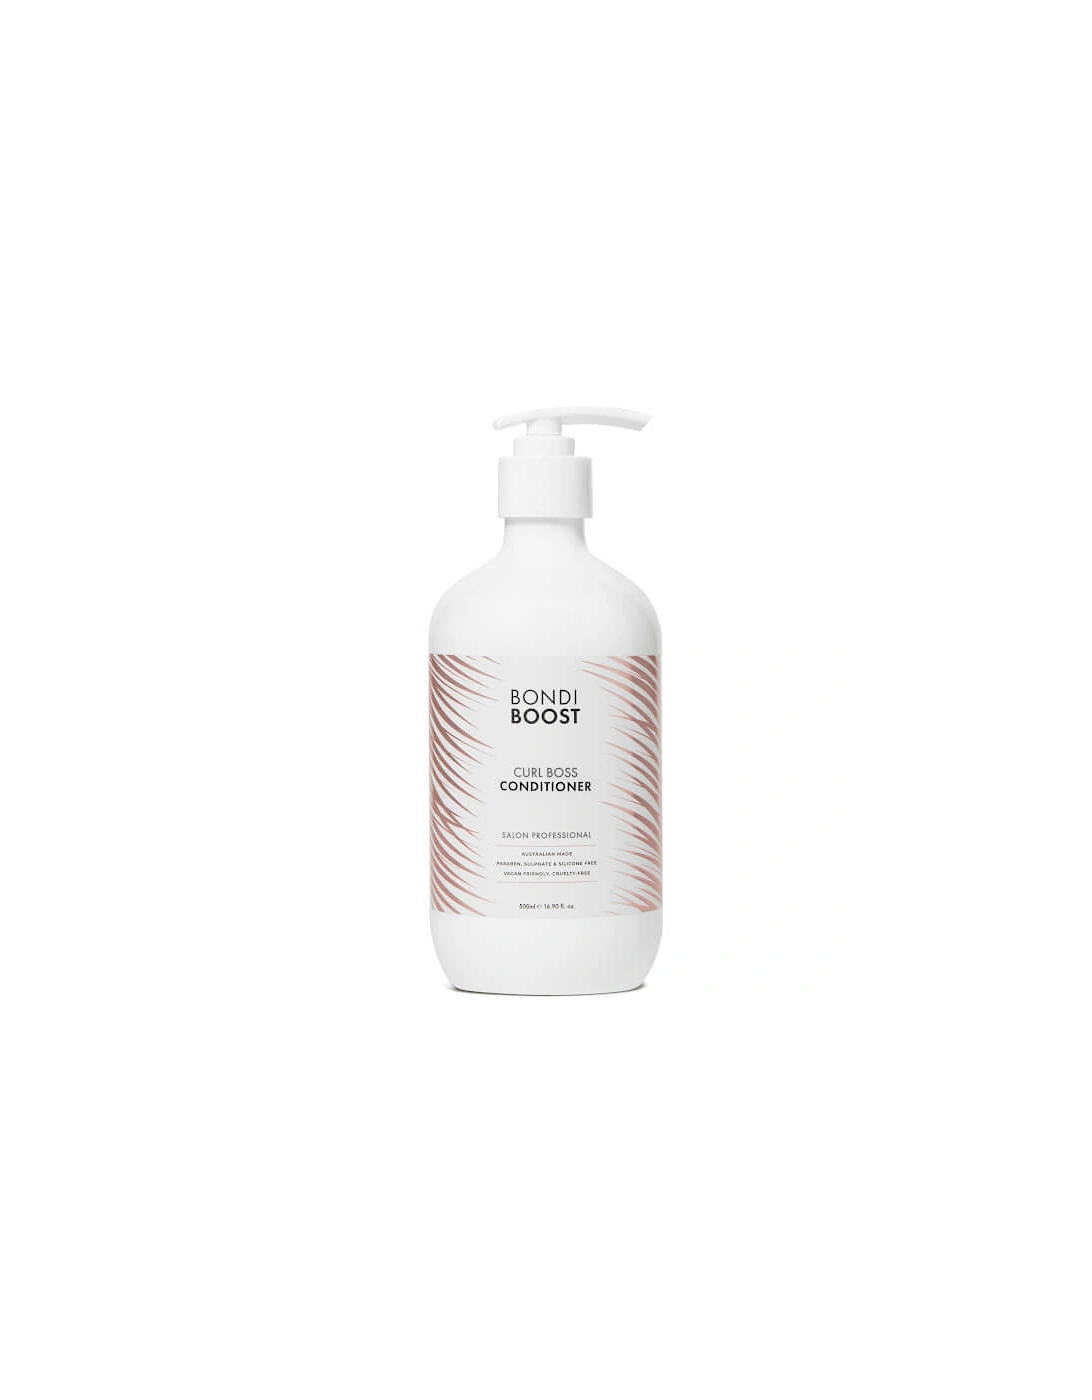 Curl Boss Conditioner 500ml, 2 of 1